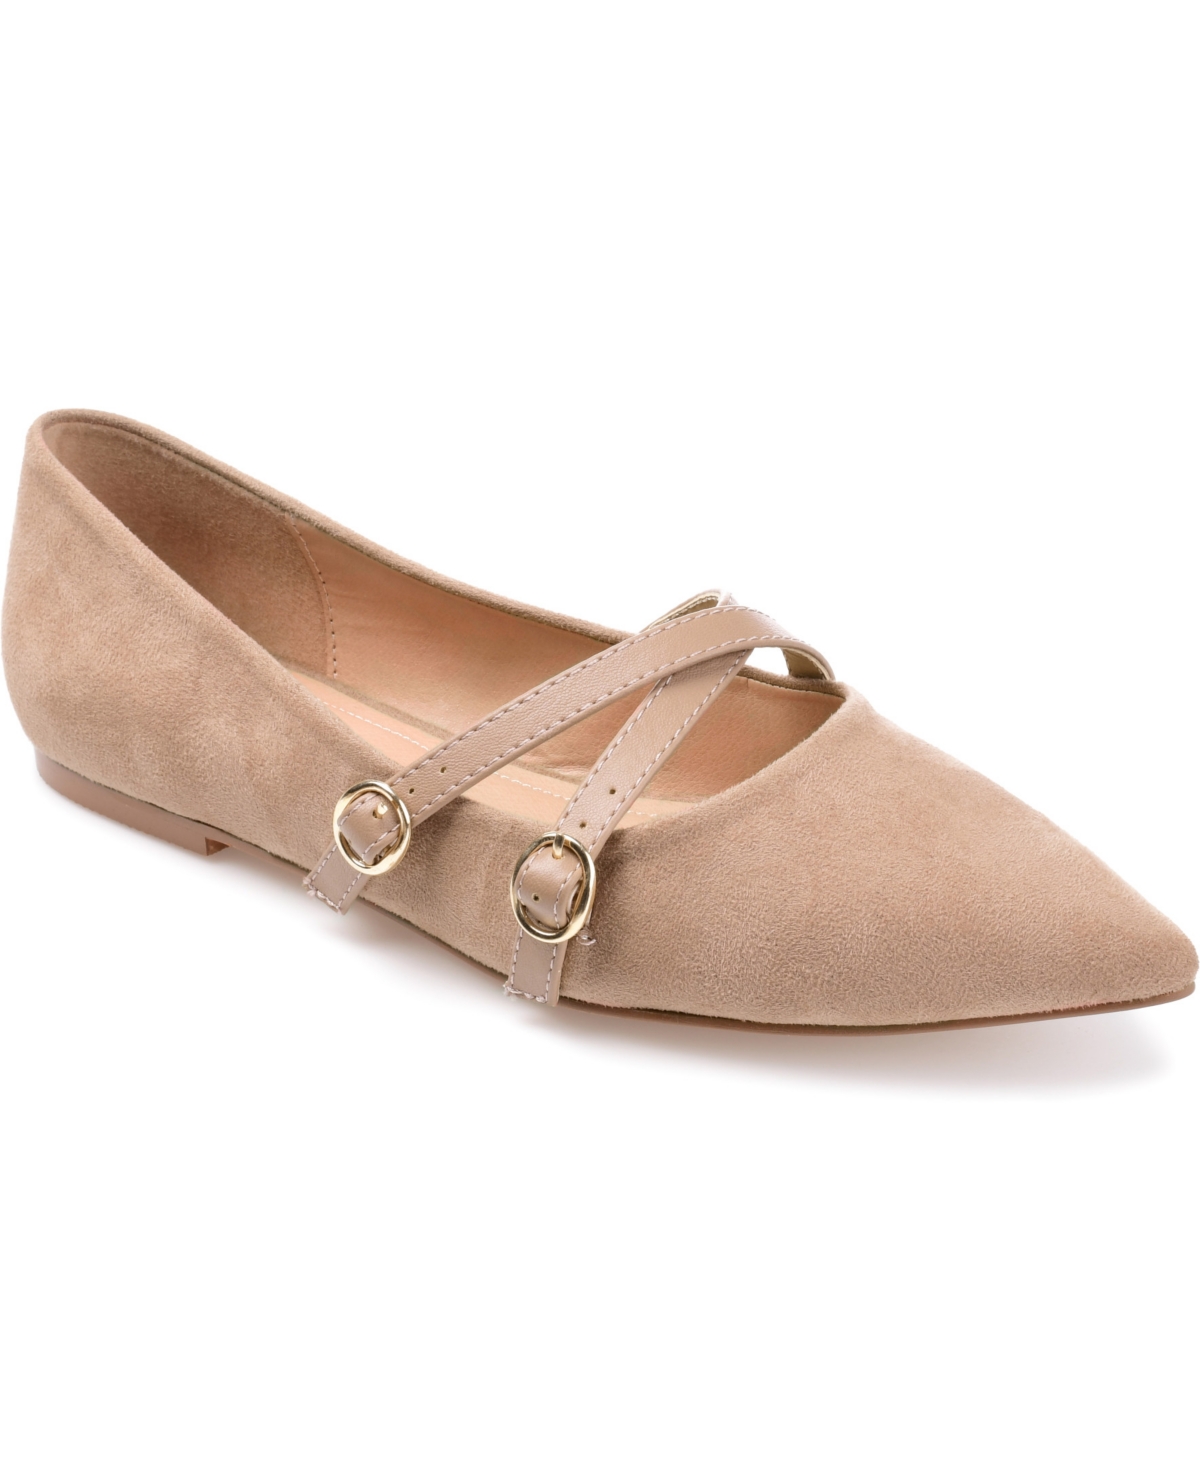 Women's Patricia Flats - Taupe